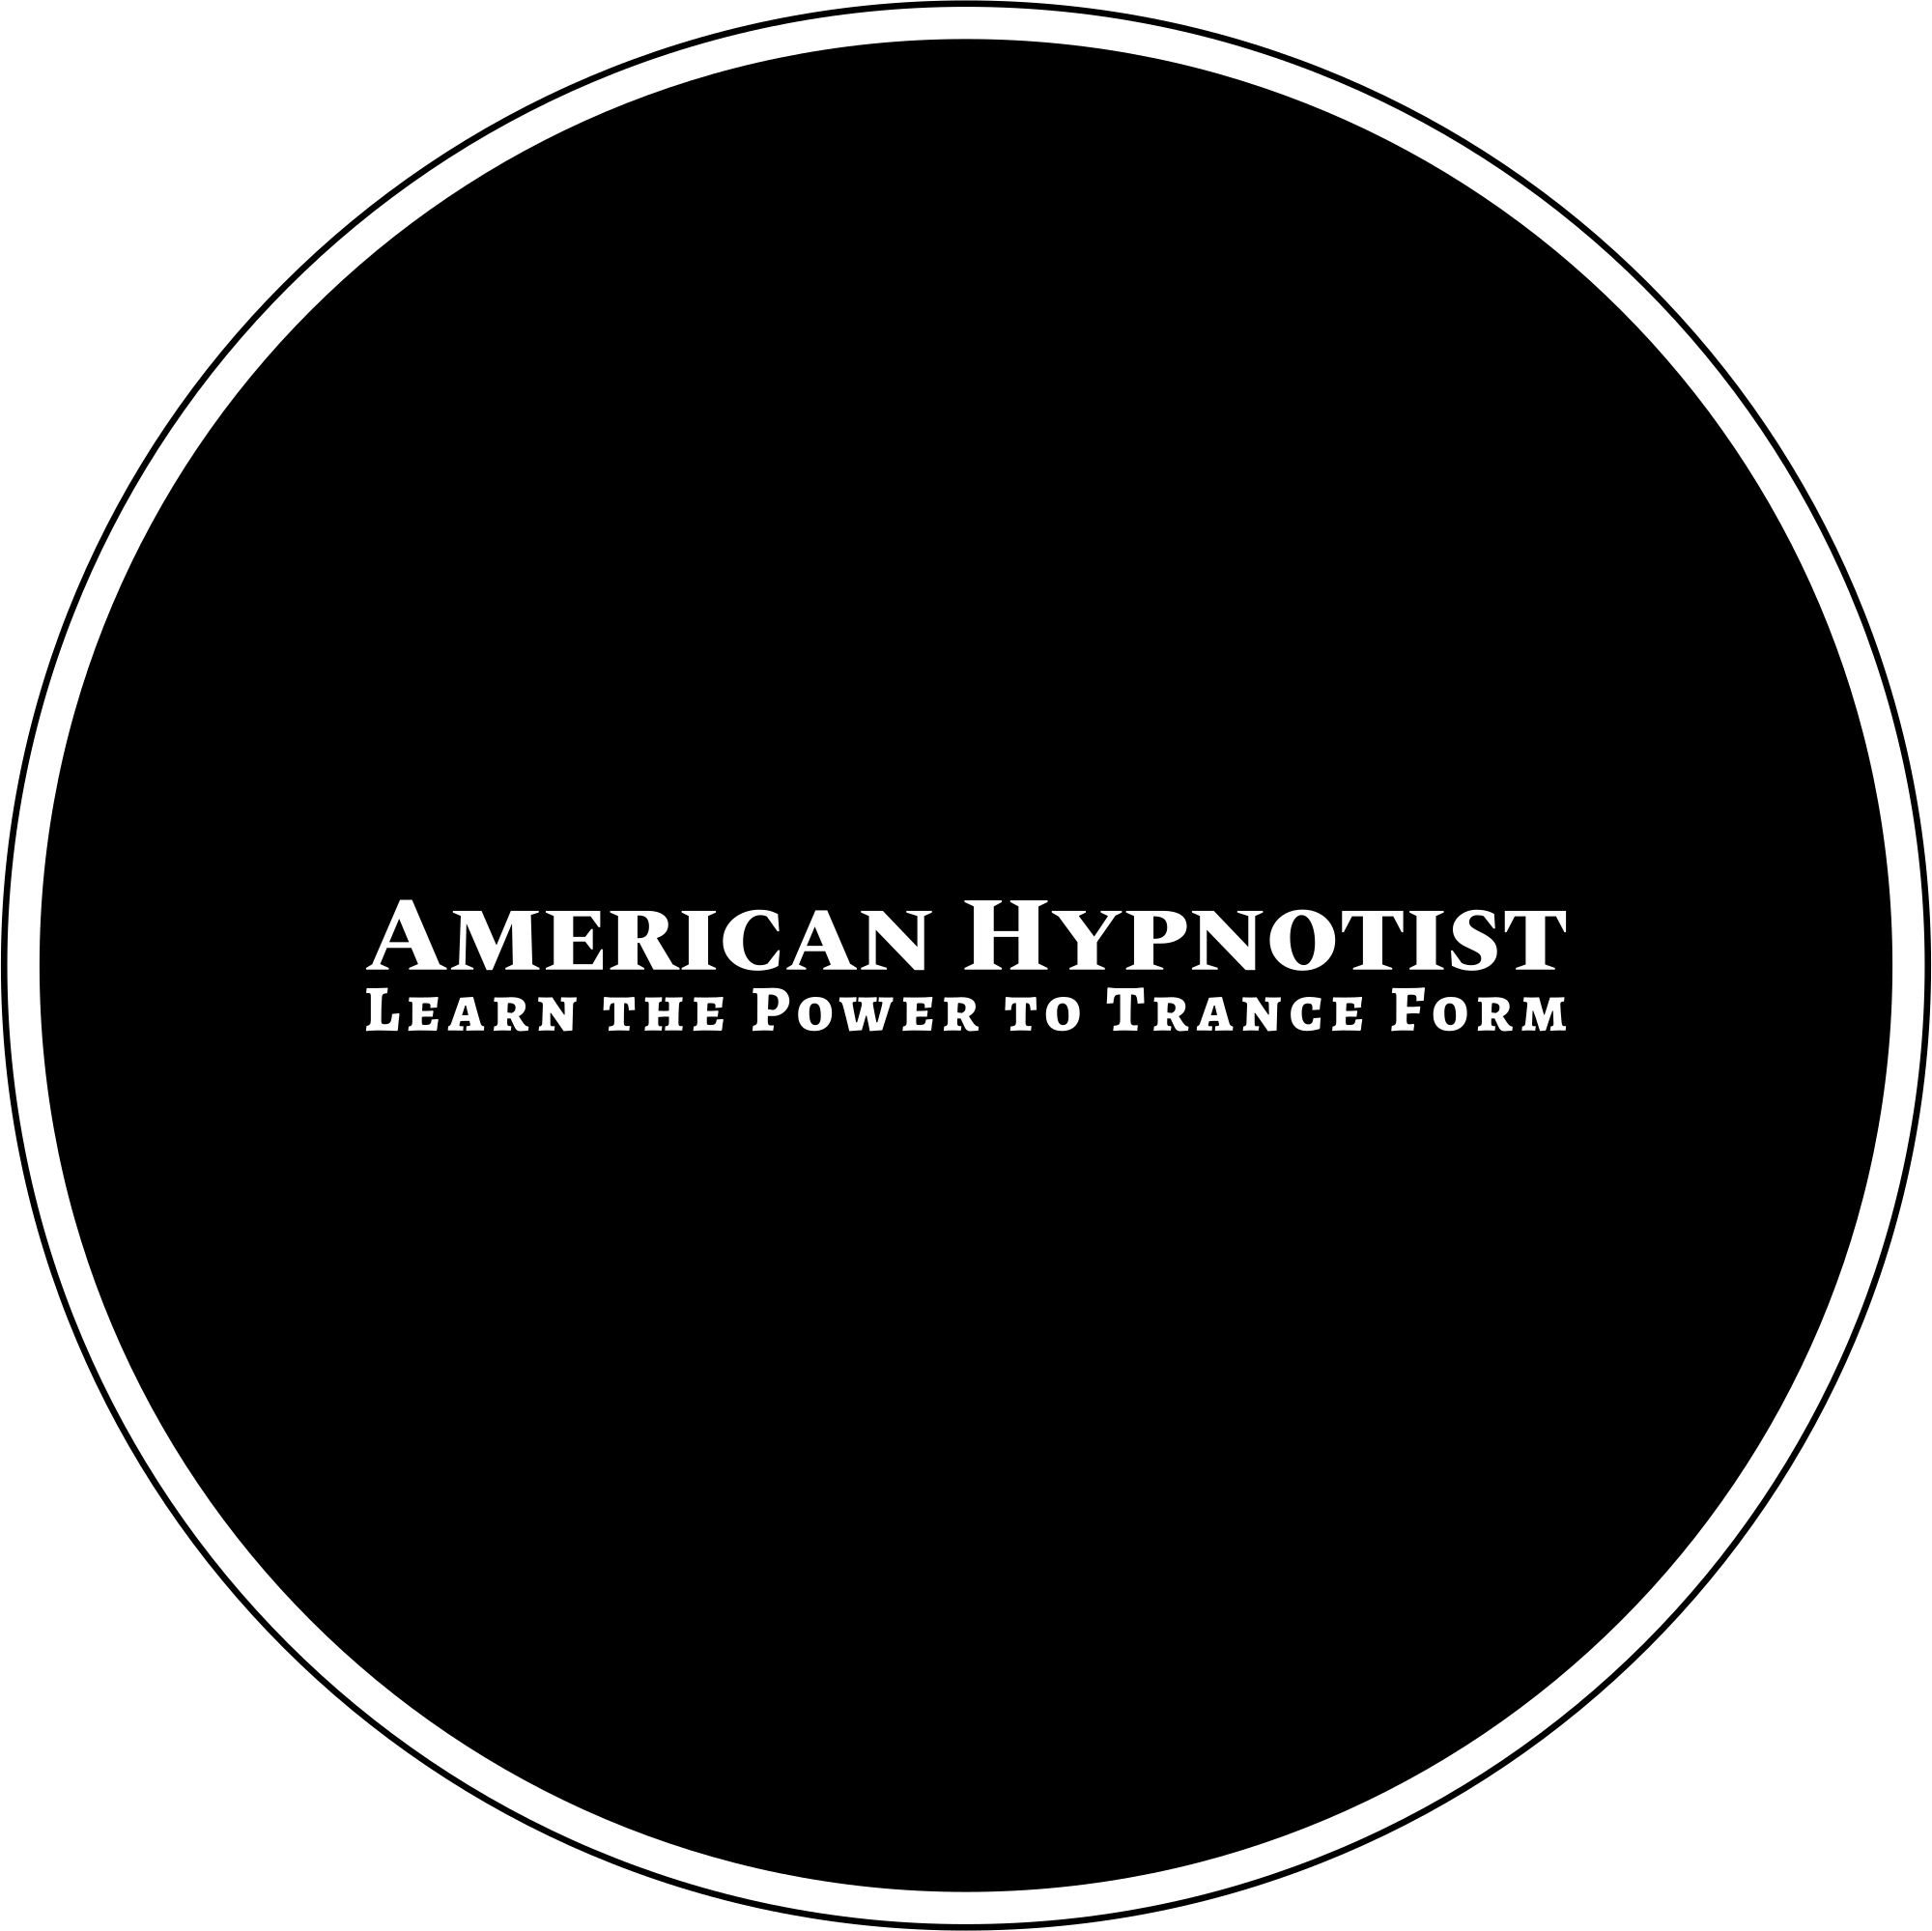 The Astounding Discoveries of an American Hypnotist